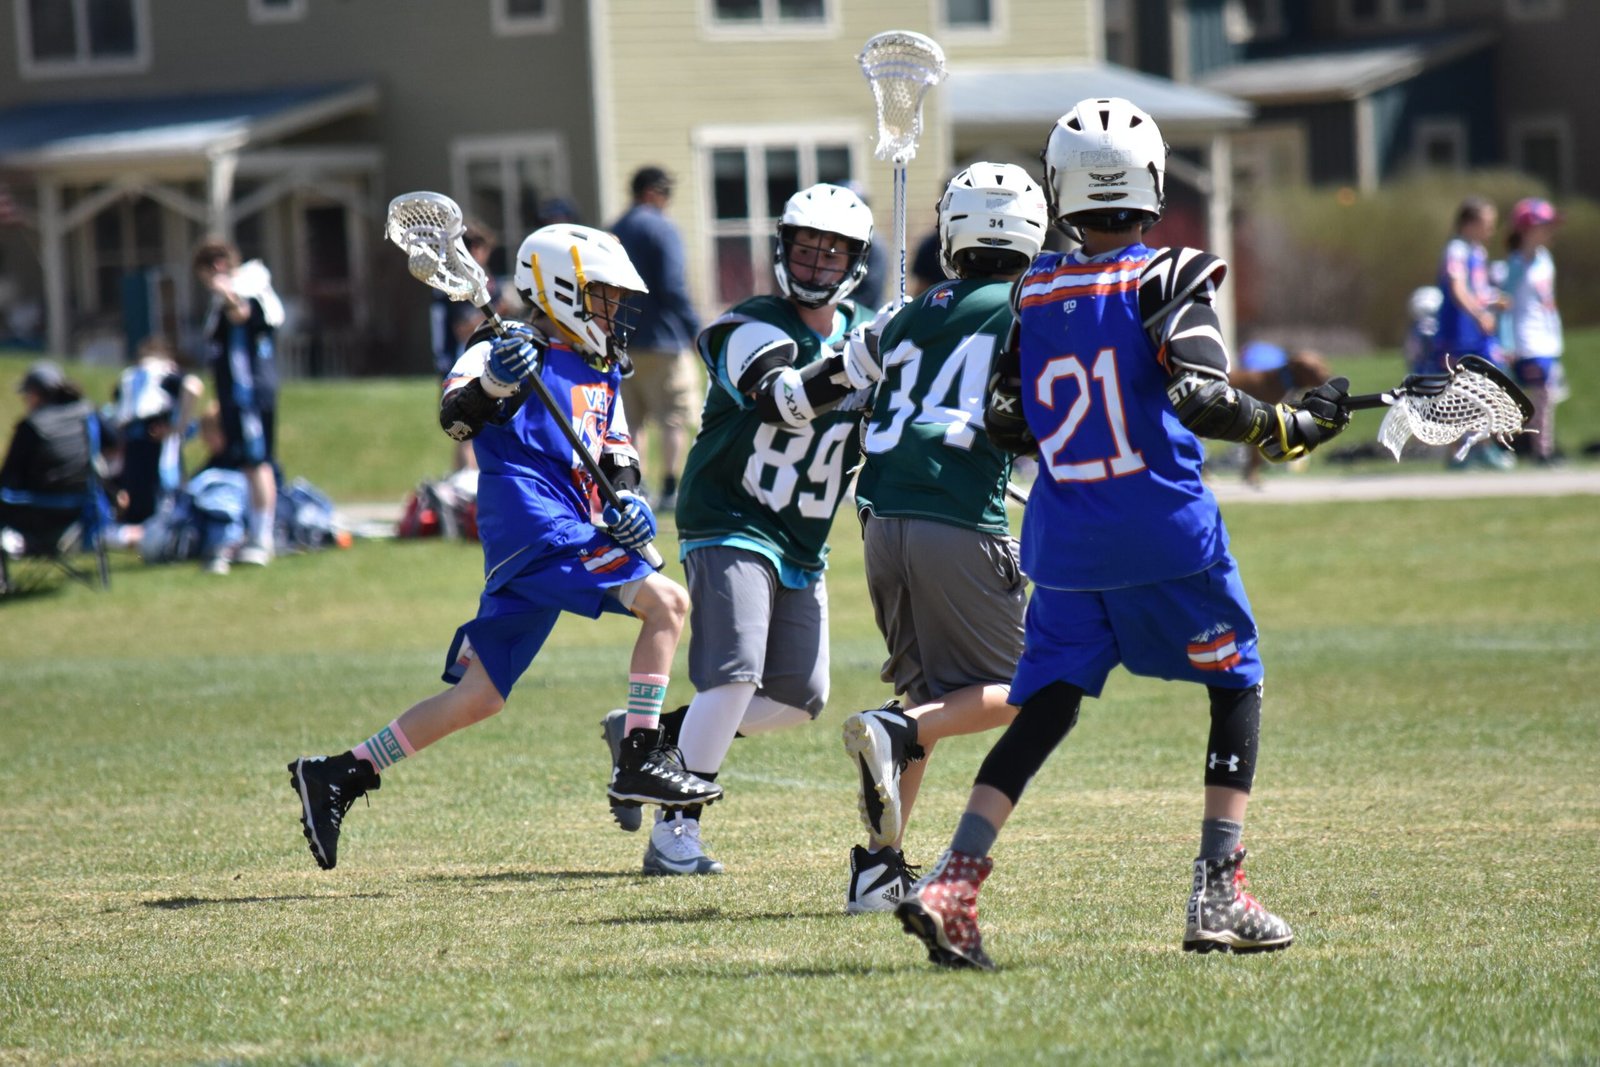 to Vail Valley Lacrosse Club